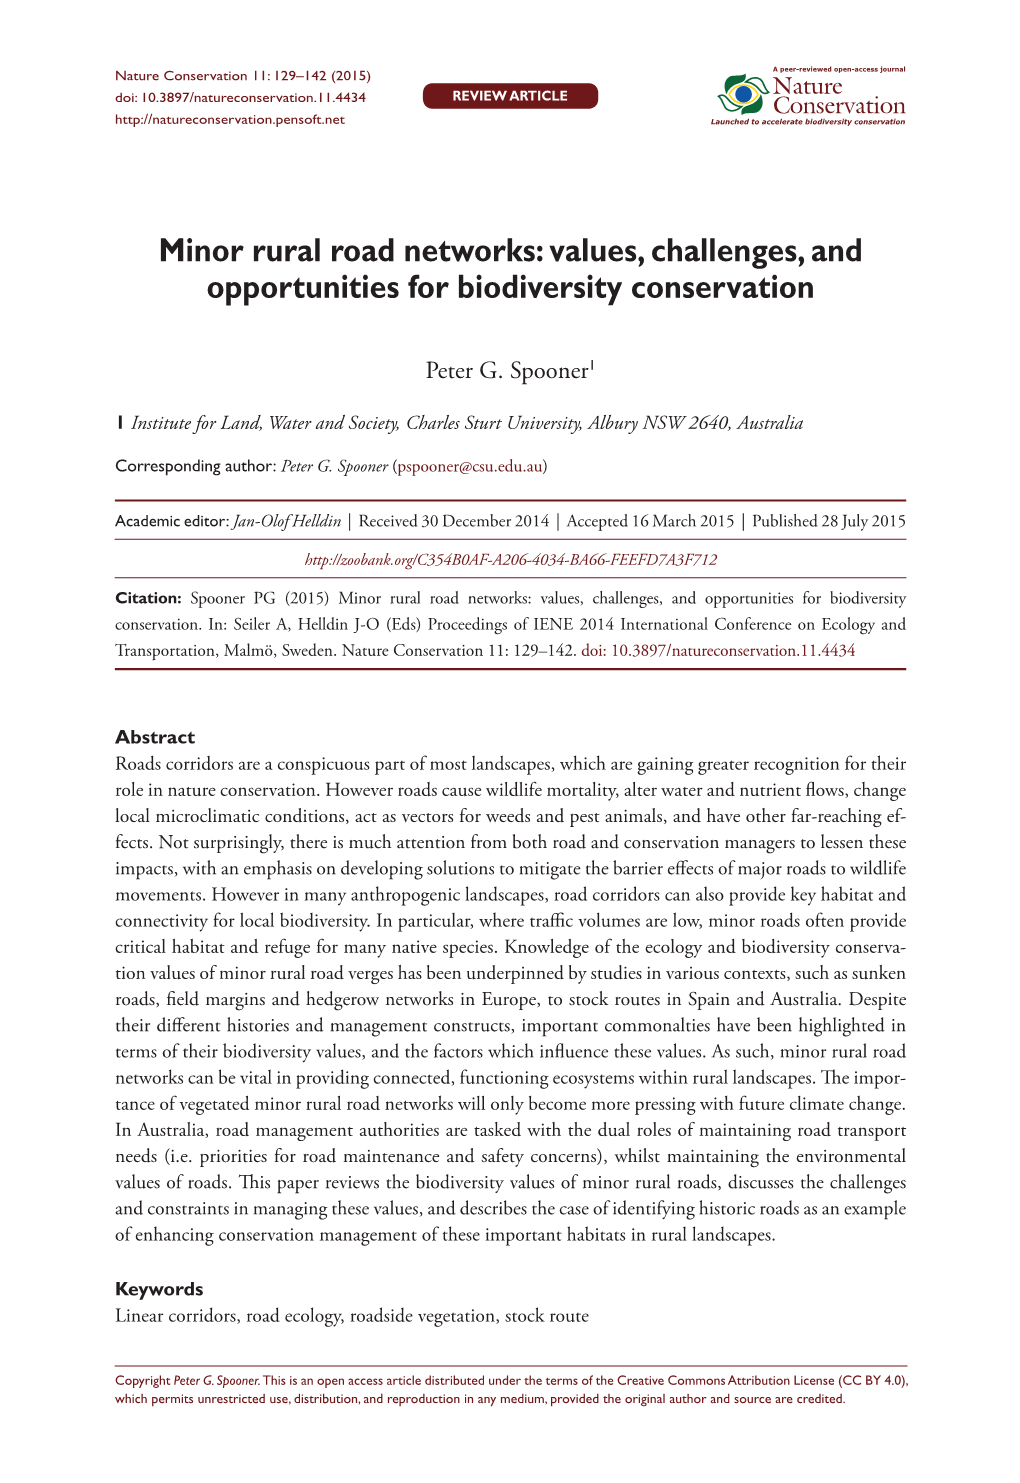 ﻿Minor Rural Road Networks: Values, Challenges, and Opportunities for Biodiversity Conservation